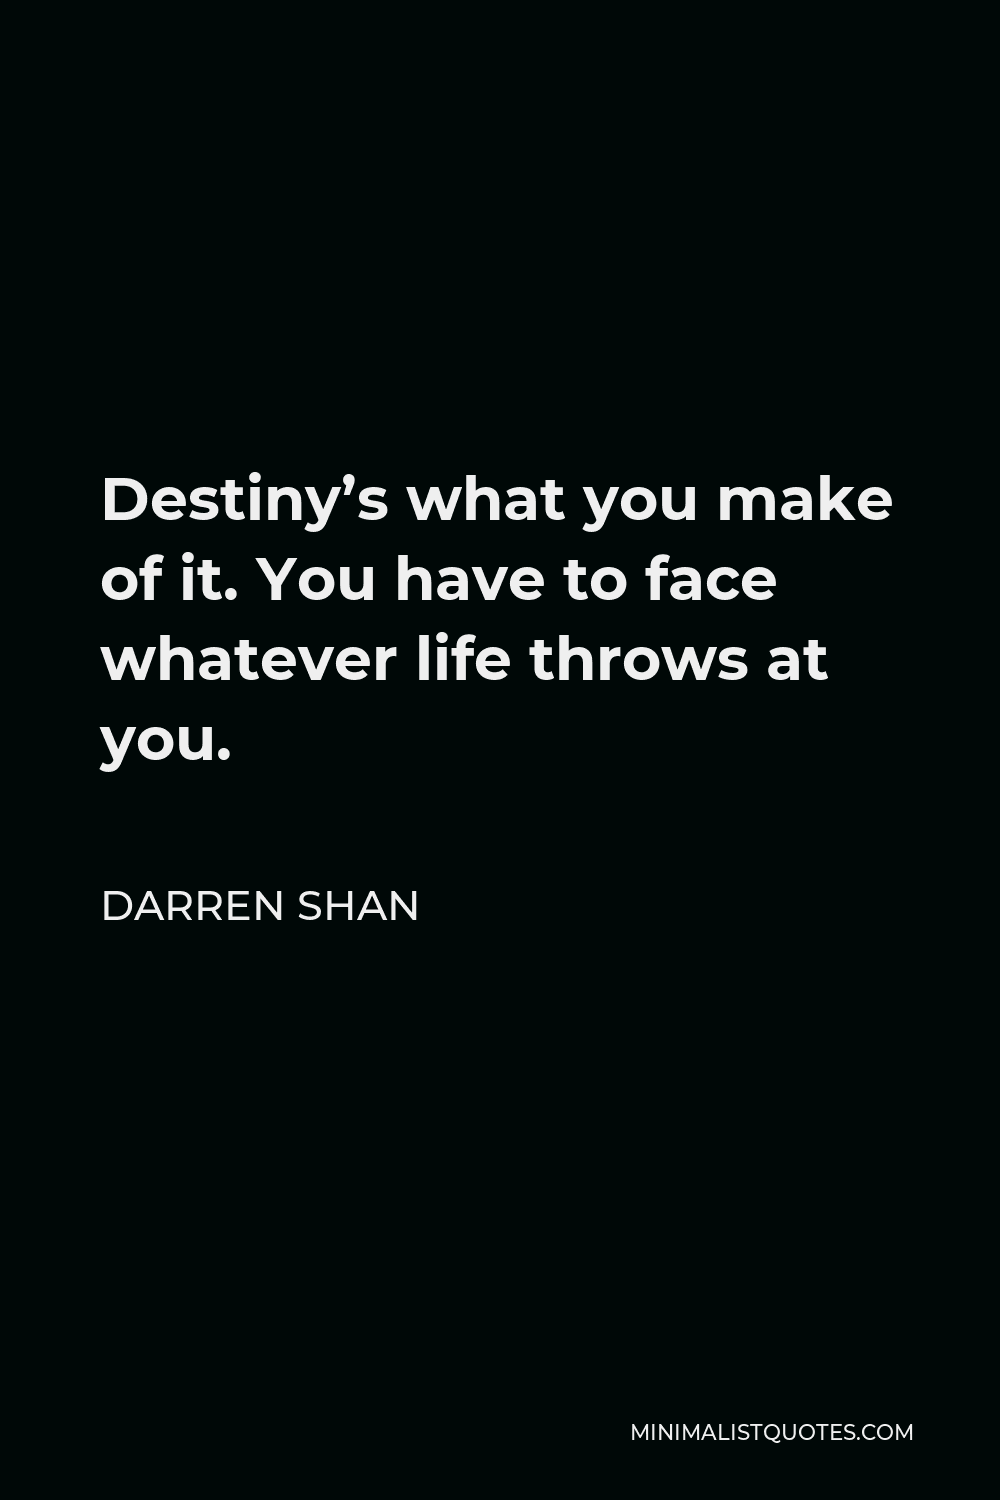 Darren Shan Quote - Destiny’s what you make of it. You have to face whatever life throws at you.